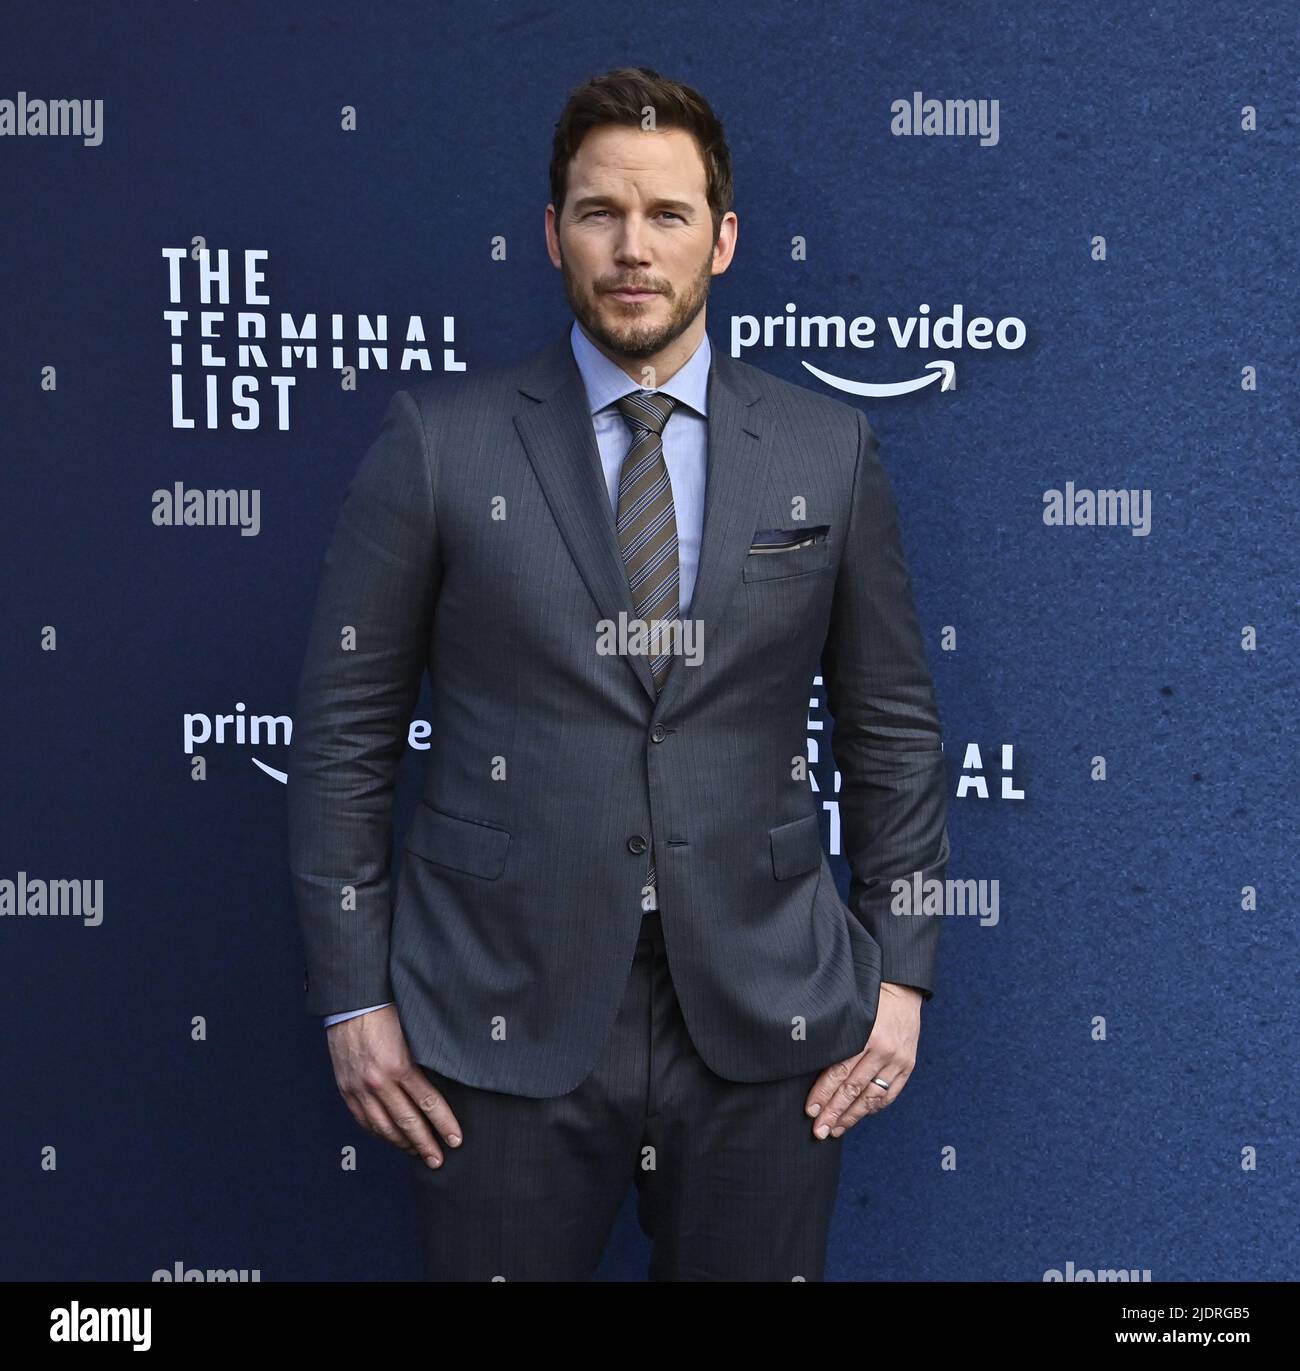 Los Angeles, United States. 22nd June, 2022. Cast member Chris Pratt attends the premiere of the motion picture thriller 'The Terminal List' at the DGA Theatre in Los Angeles on Wednesday, June 22, 2022. Storyline: A former Navy SEAL officer investigates why his entire platoon was ambushed during a high-stakes covert mission. Photo by Jim Ruymen/UPI Credit: UPI/Alamy Live News Stock Photo